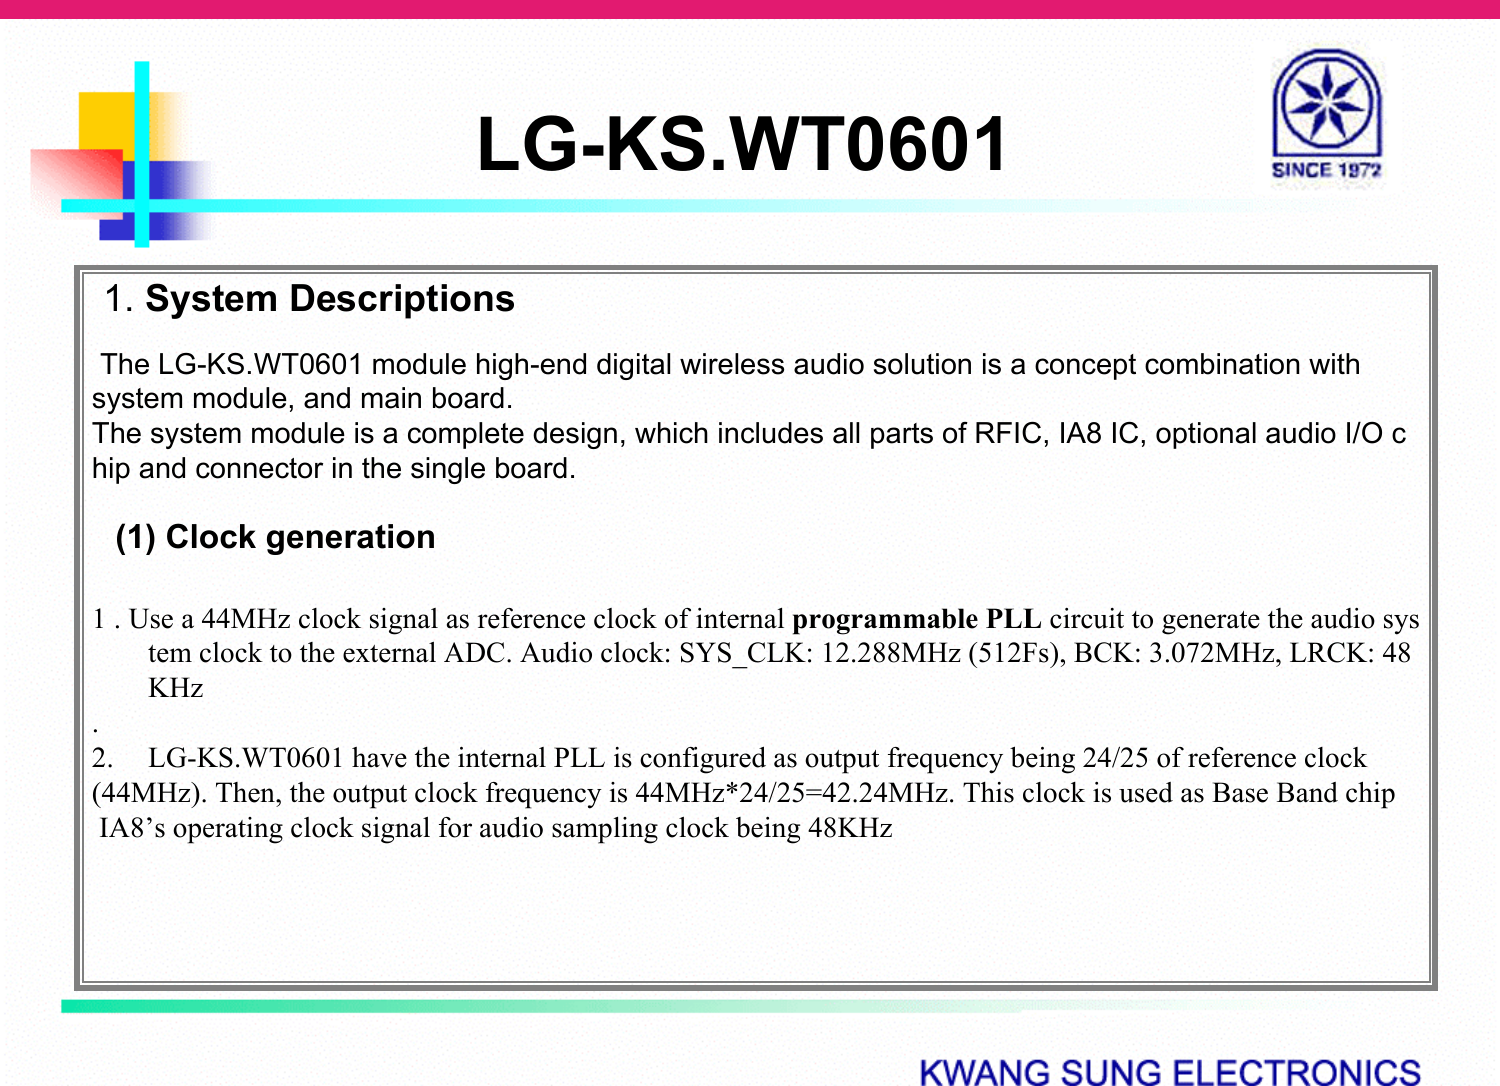 LG-KS.WT06011. System DescriptionsThe LG-KS.WT0601 module high-end digital wireless audio solution is a concept combination with system module, and main board.The system module is a complete design, which includes all parts of RFIC, IA8 IC, optional audio I/O chip and connector in the single board. (1) Clock generation1 . Use a 44MHz clock signal as reference clock of internal programmable PLL circuit to generate the audio system clock to the external ADC. Audio clock: SYS_CLK: 12.288MHz (512Fs), BCK: 3.072MHz, LRCK: 48KHz.2. LG-KS.WT0601 have the internal PLL is configured as output frequency being 24/25 of reference clock (44MHz). Then, the output clock frequency is 44MHz*24/25=42.24MHz. This clock is used as Base Band chipIA8’s operating clock signal for audio sampling clock being 48KHz 